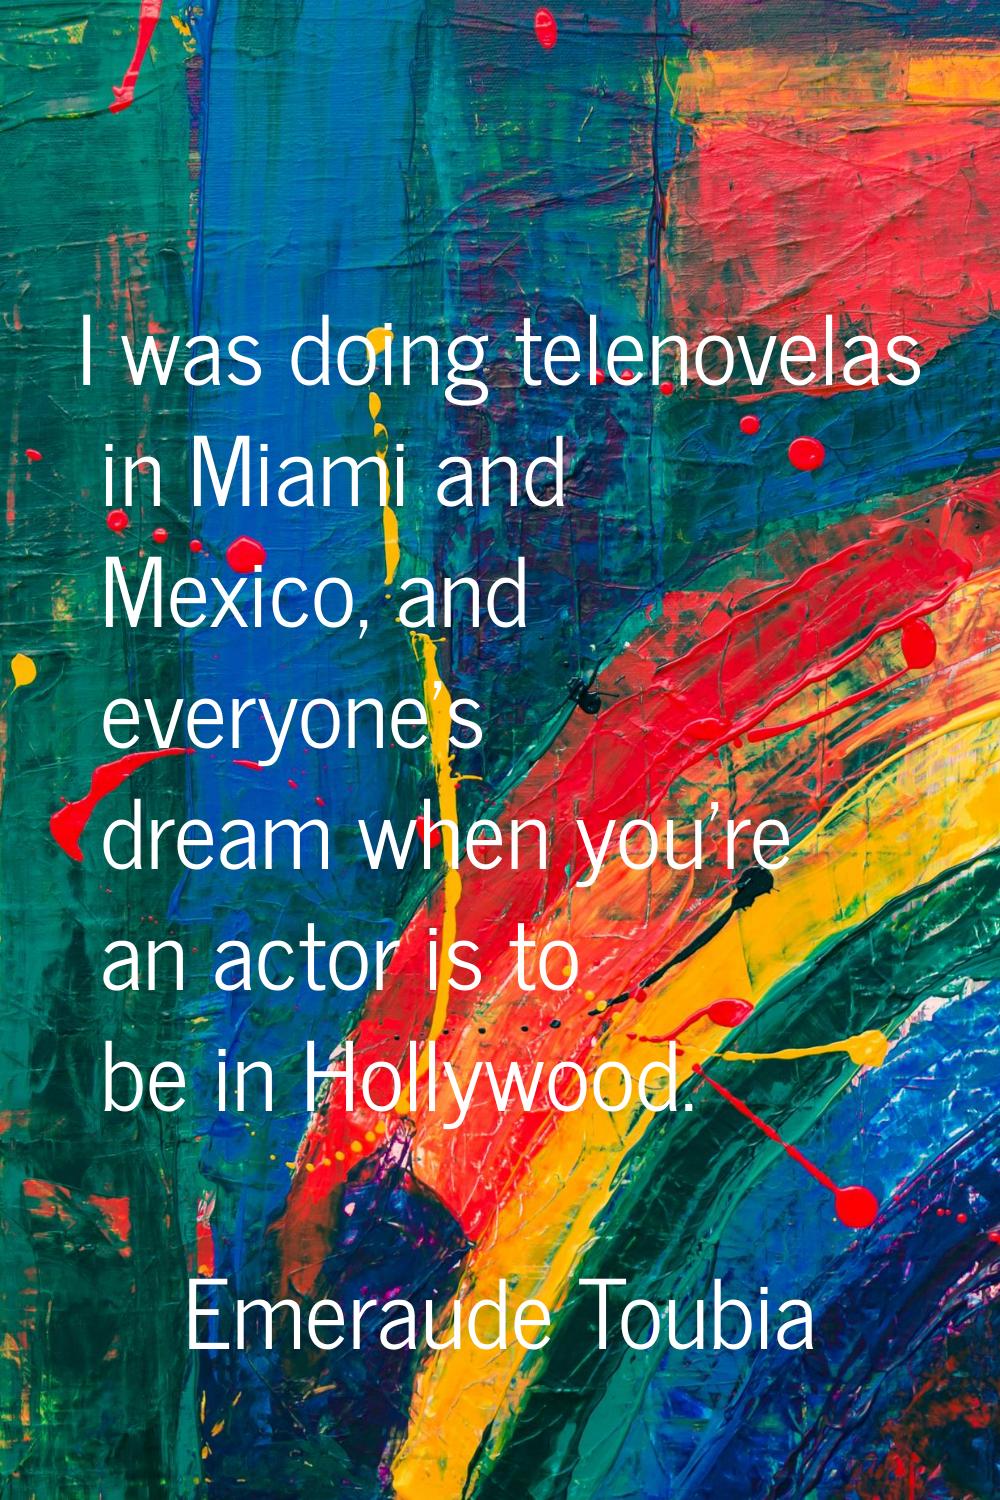 I was doing telenovelas in Miami and Mexico, and everyone's dream when you're an actor is to be in 